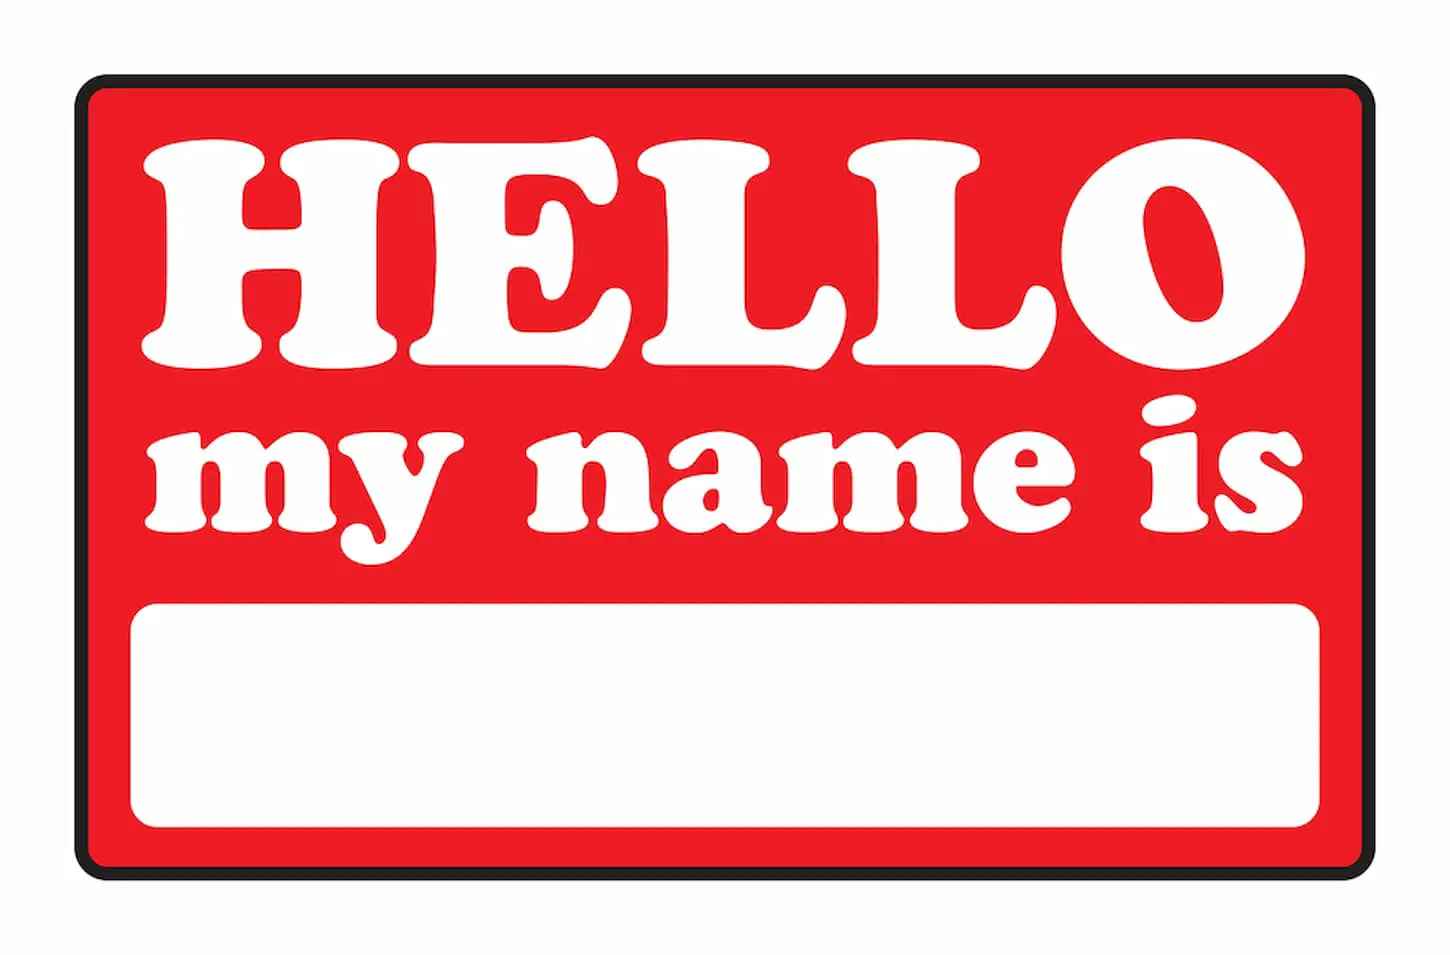 An image of a blank name tag that says "Hello my name is" on a red background.